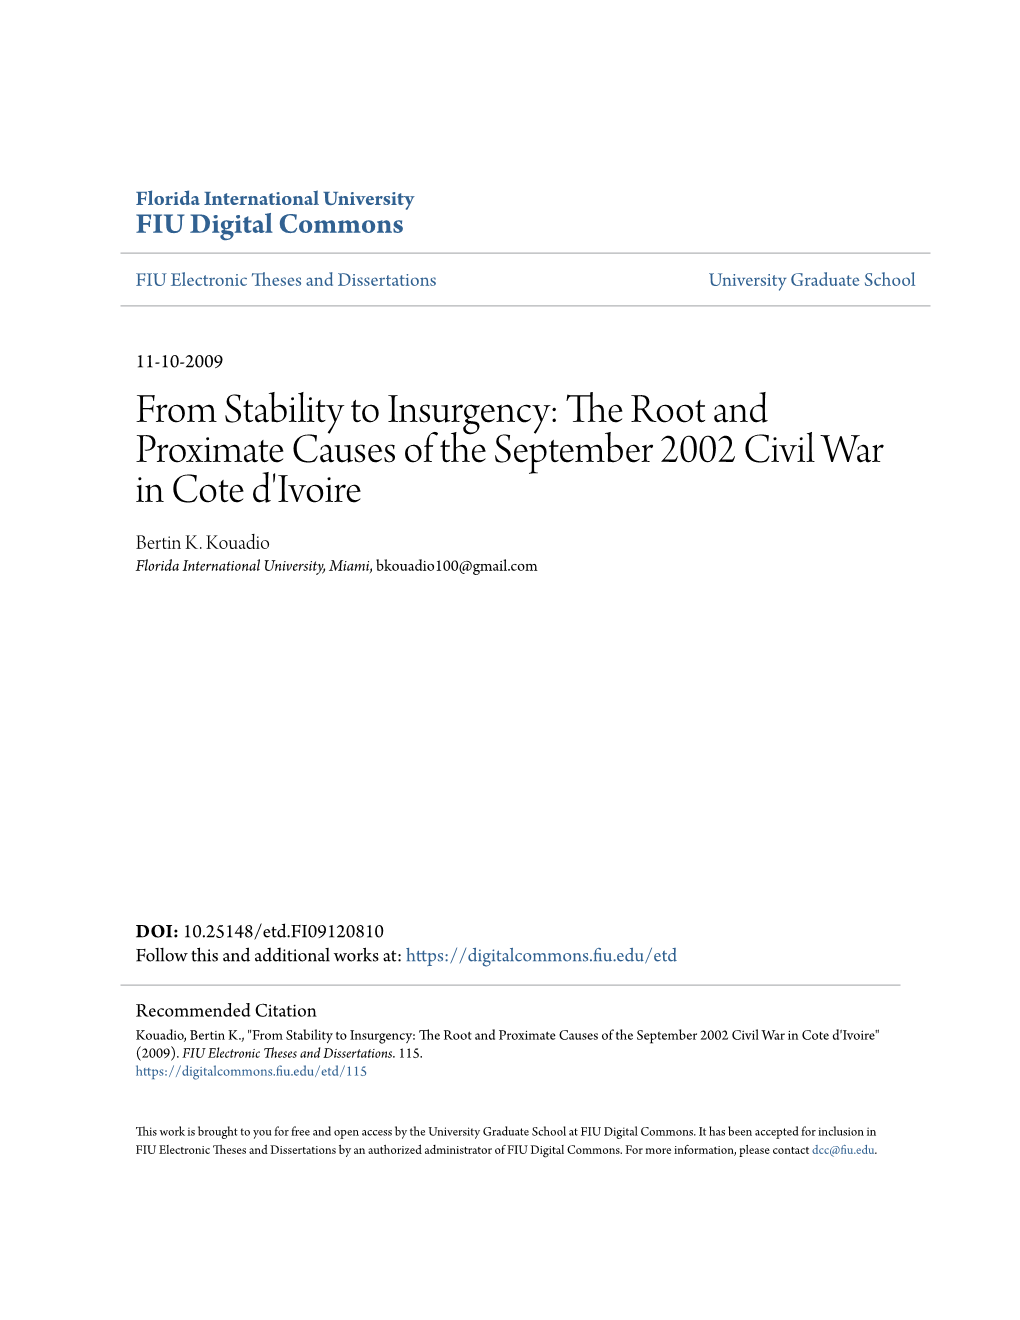 From Stability to Insurgency: the Root and Proximate Causes of the September 2002 Civil War in Cote D'ivoire Bertin K